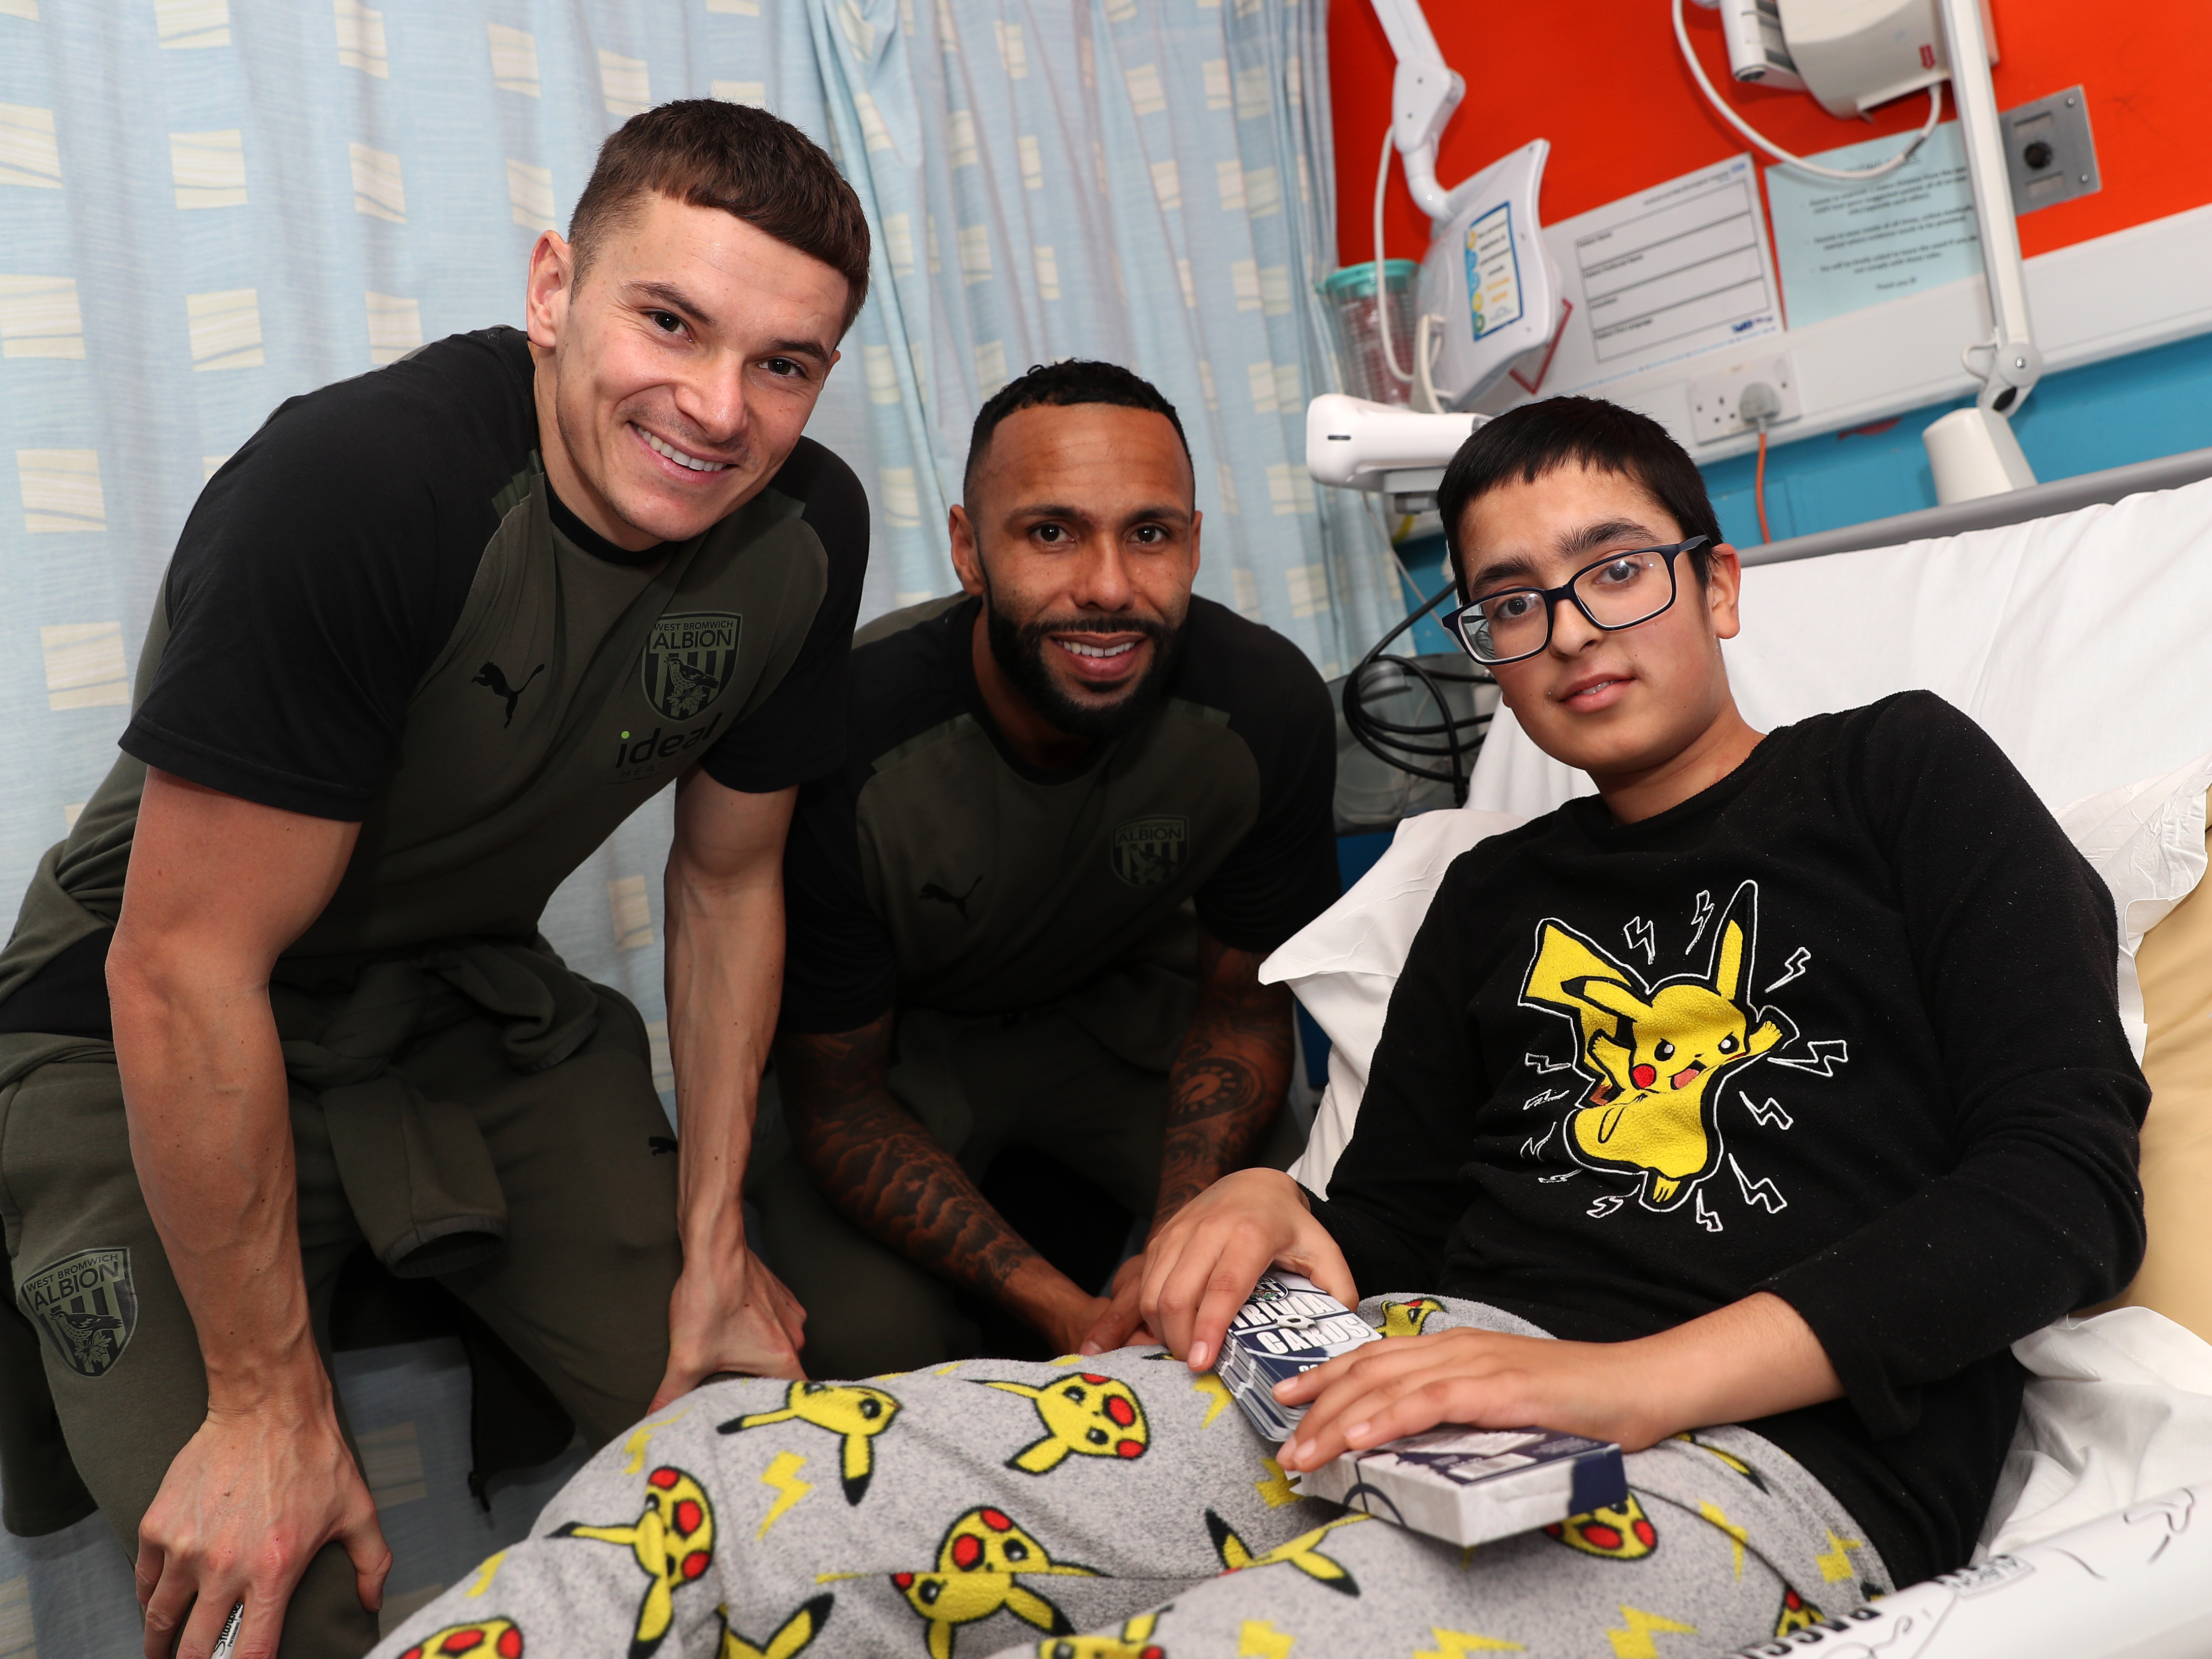 Conor Townsend and Kyle Bartley pose for a photo with a young patient at Sandwell General Hospital